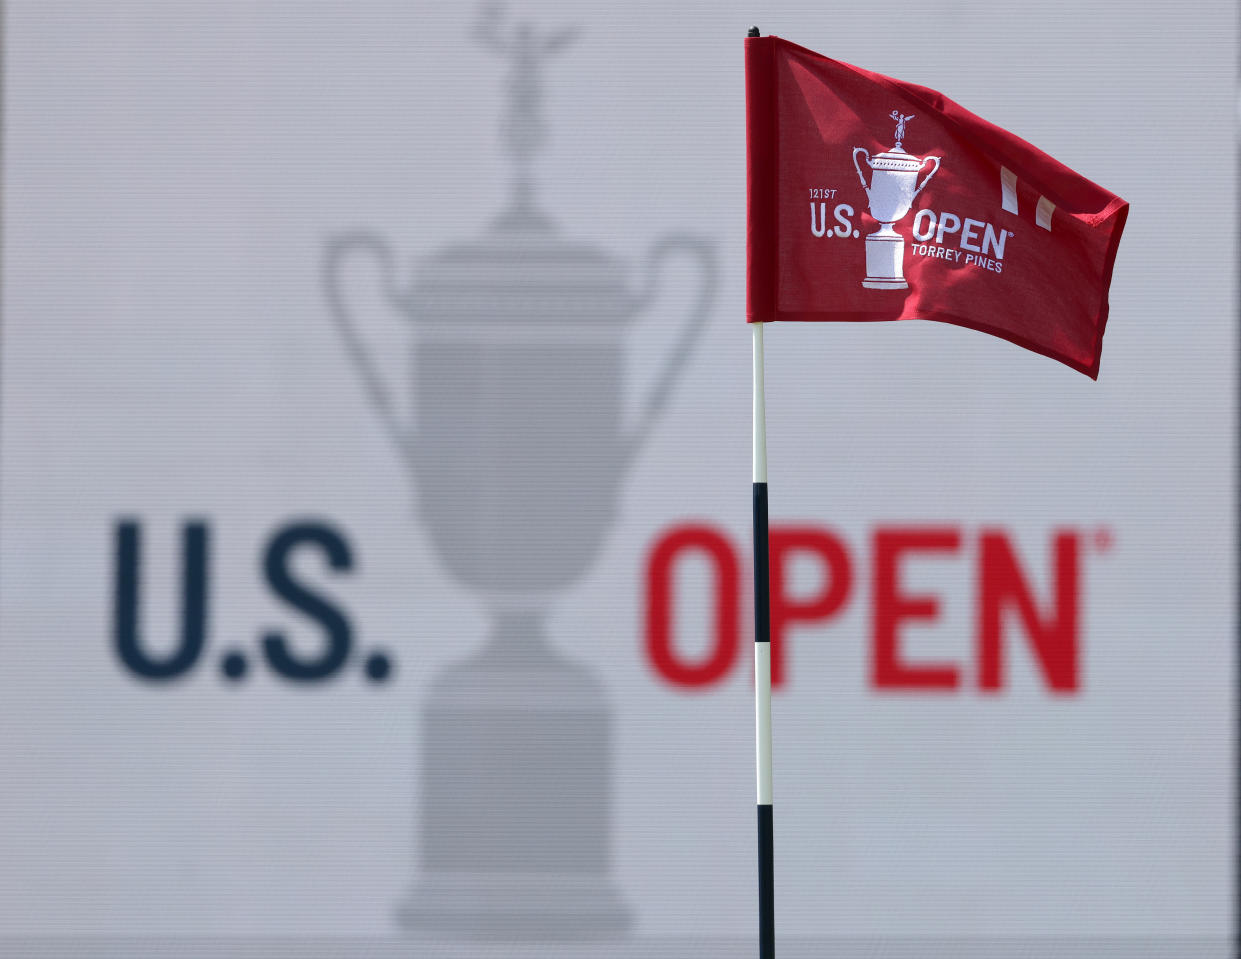 SAN DIEGO, CALIFORNIA - JUNE 15: A general view of a flag and signage is seen on the 17th green during a practice round prior to the start of the 2021 U.S. Open at Torrey Pines Golf Course on June 15, 2021 in San Diego, California. (Photo by Harry How/Getty Images)